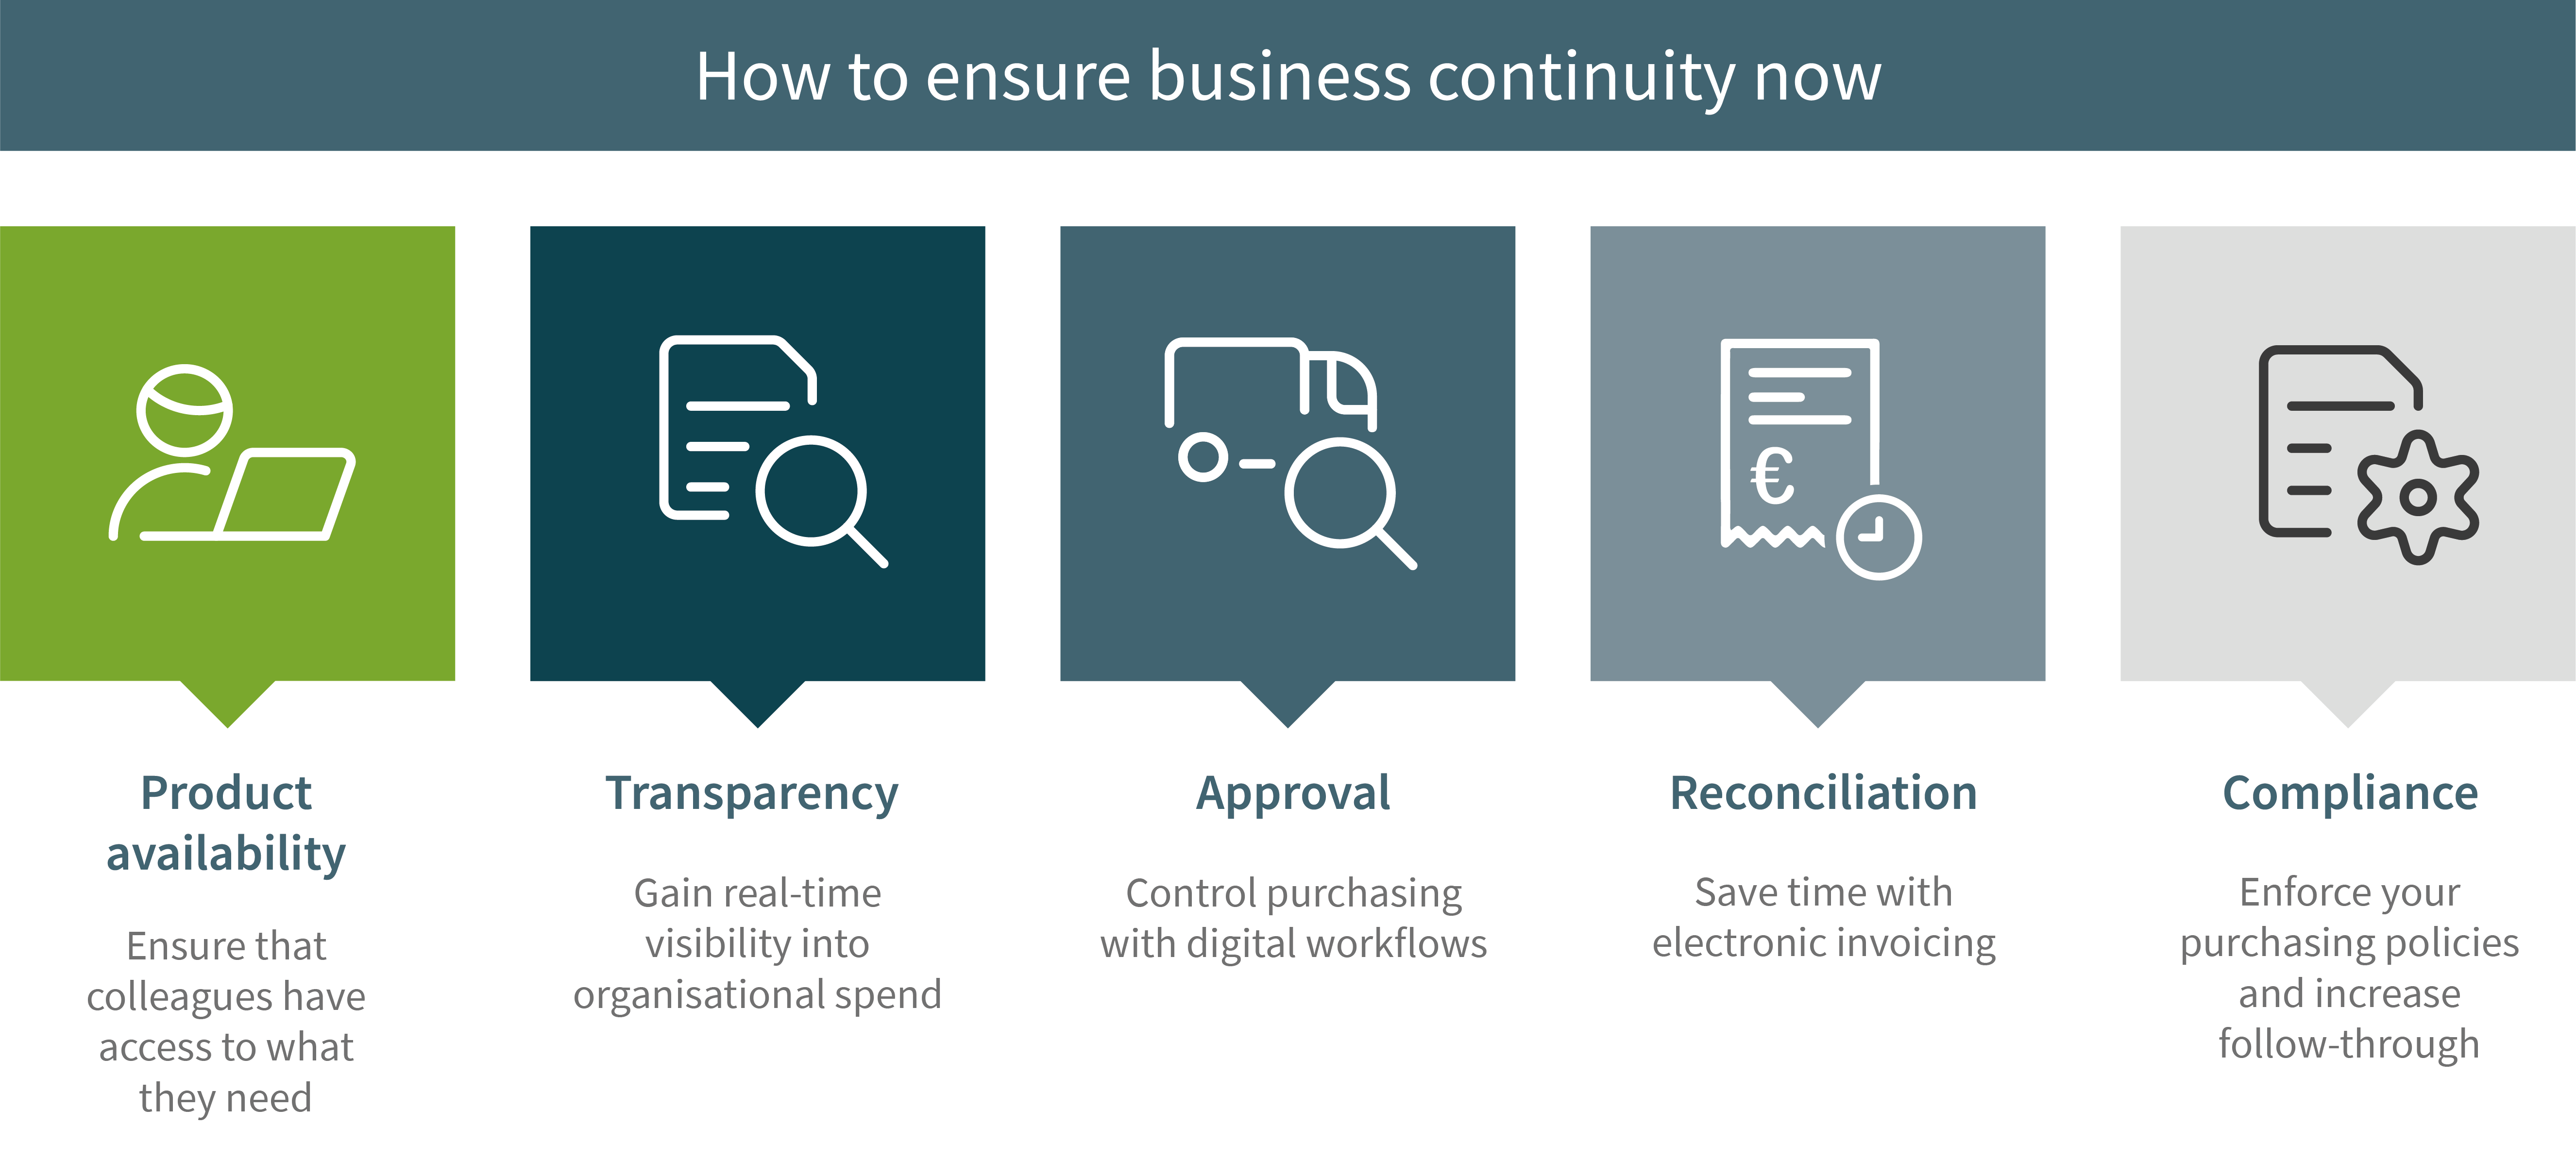 How to ensure business continuity